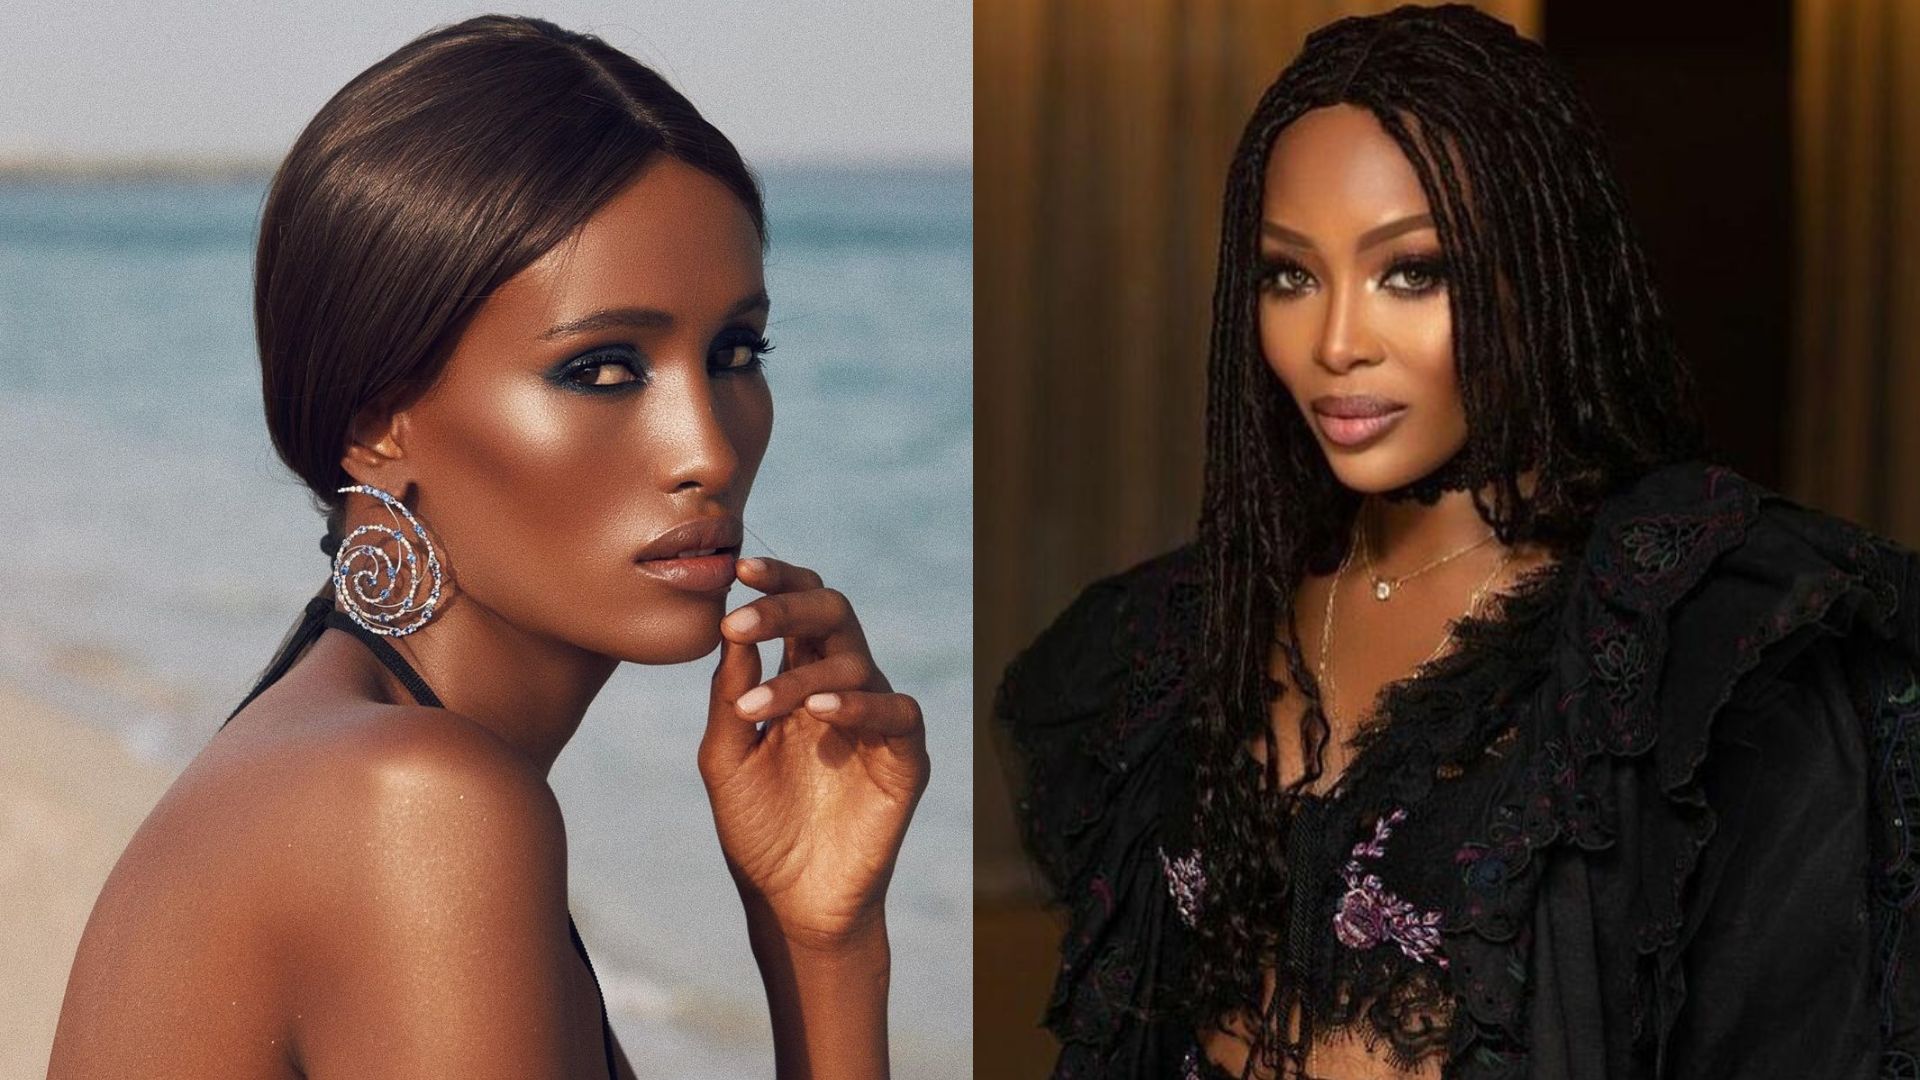 Real Housewives of Dubai star Chanel Ayan reunites with Naomi Campbell  after 7 years